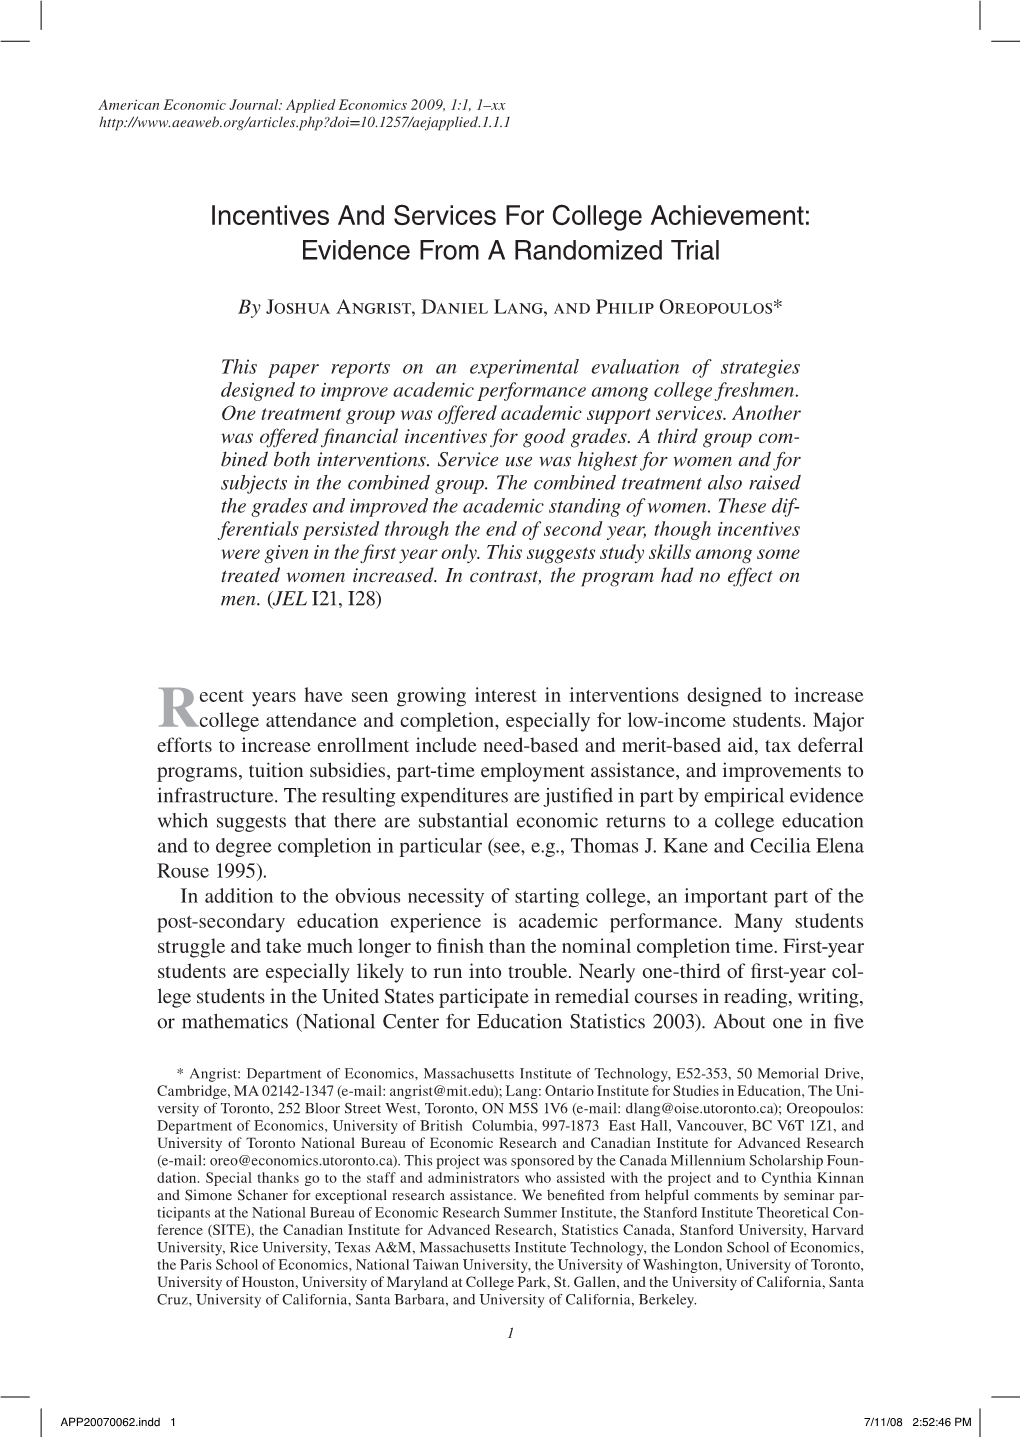 Incentives and Services for College Achievement: Evidence from a Randomized Trial